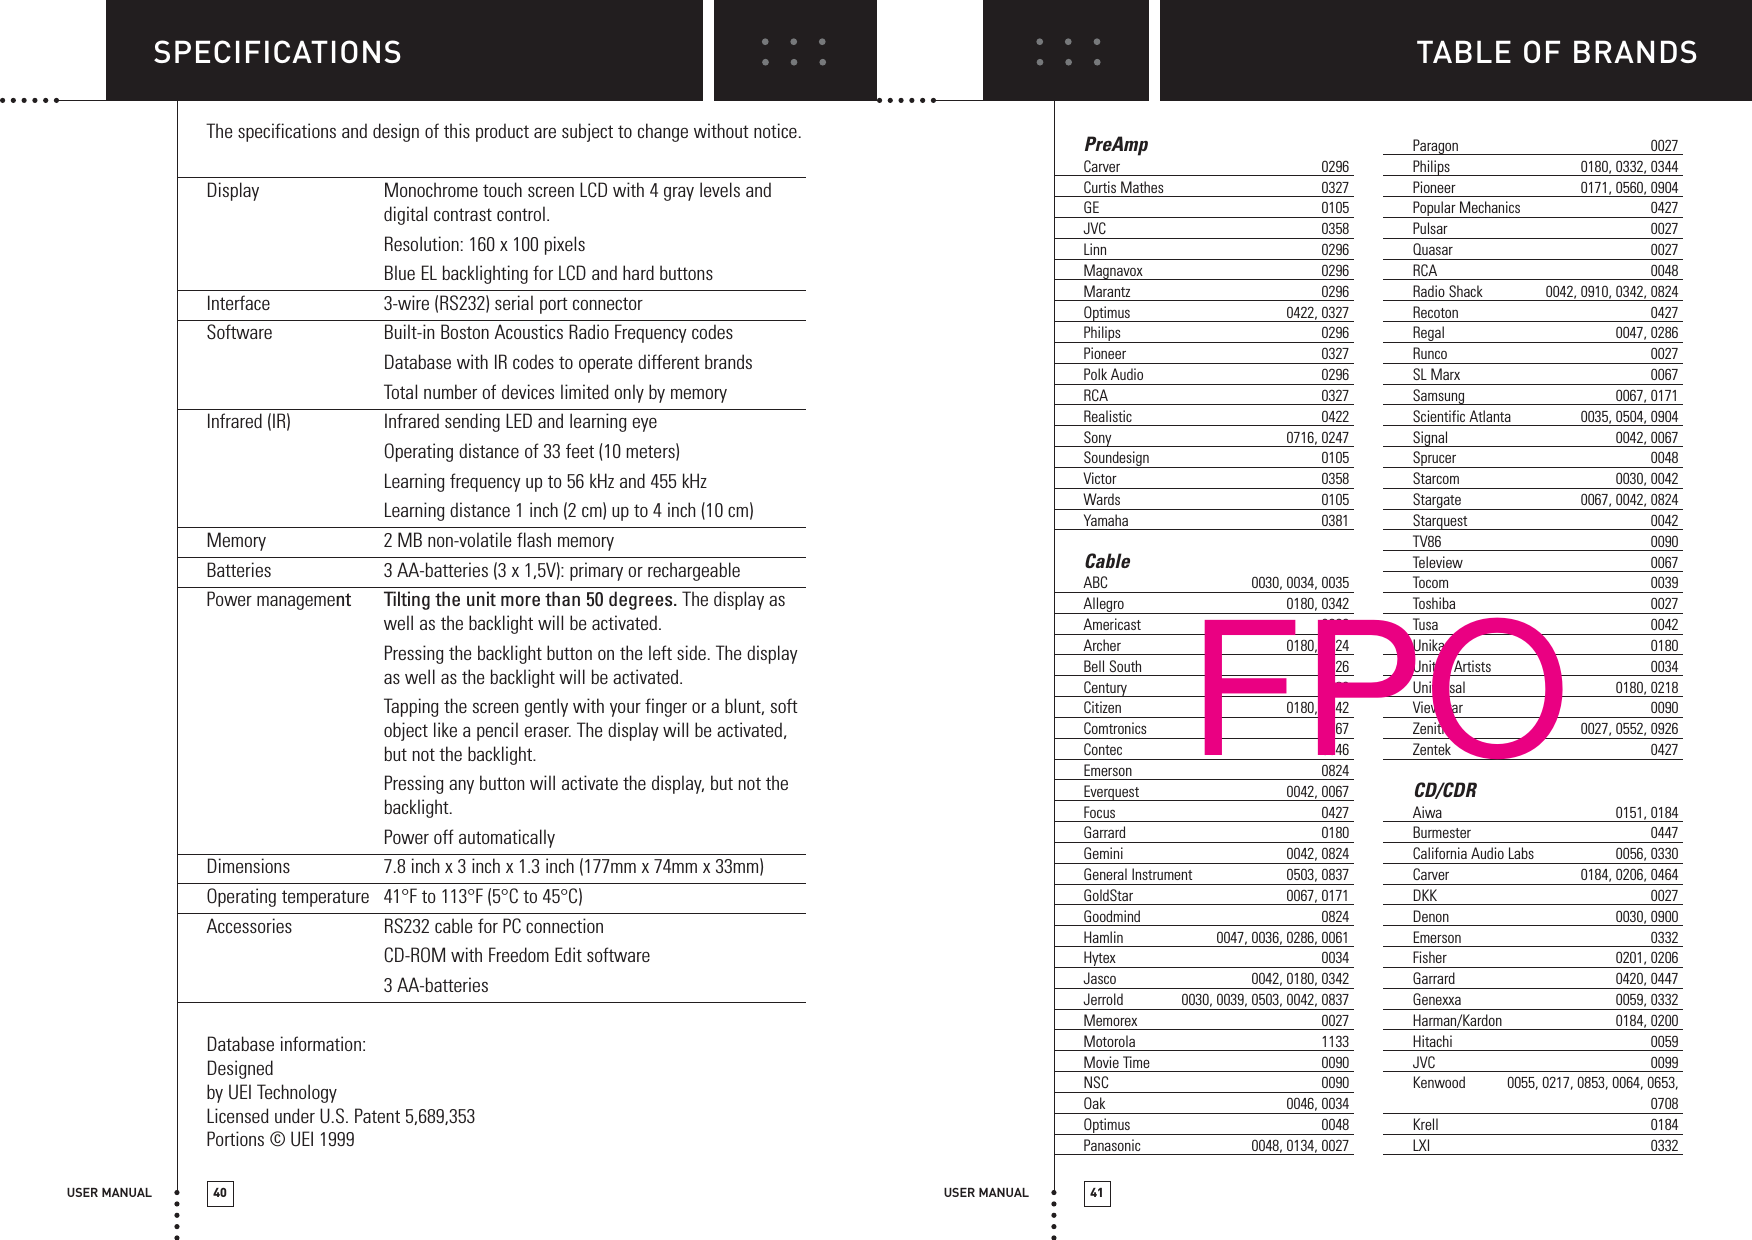 TABLE OF BRANDSUSER MANUAL 41SPECIFICATIONSUSER MANUAL 40The specifications and design of this product are subject to change without notice.Display  Monochrome touch screen LCD with 4 gray levels anddigital contrast control.Resolution: 160 x 100 pixelsBlue EL backlighting for LCD and hard buttonsInterface  3-wire (RS232) serial port connectorSoftware  Built-in Boston Acoustics Radio Frequency codesDatabase with IR codes to operate different brandsTotal number of devices limited only by memoryInfrared (IR)  Infrared sending LED and learning eyeOperating distance of 33 feet (10 meters)Learning frequency up to 56 kHz and 455 kHzLearning distance 1 inch (2 cm) up to 4 inch (10 cm) Memory  2 MB non-volatile flash memoryBatteries  3 AA-batteries (3 x 1,5V): primary or rechargeablePower management Tilting the unit more than 50 degrees. The display aswell as the backlight will be activated.Pressing the backlight button on the left side. The displayas well as the backlight will be activated.Tapping the screen gently with your finger or a blunt, softobject like a pencil eraser. The display will be activated,but not the backlight.Pressing any button will activate the display, but not thebacklight.Power off automaticallyDimensions  7.8 inch x 3 inch x 1.3 inch (177mm x 74mm x 33mm)Operating temperature 41°F to 113°F (5°C to 45°C)Accessories  RS232 cable for PC connectionCD-ROM with Freedom Edit software3 AA-batteriesDatabase information:Designed by UEI TechnologyLicensed under U.S. Patent 5,689,353Portions © UEI 1999PreAmpCarver 0296Curtis Mathes 0327GE 0105JVC 0358Linn 0296Magnavox 0296Marantz 0296Optimus 0422, 0327Philips 0296Pioneer 0327Polk Audio 0296RCA 0327Realistic 0422Sony 0716, 0247Soundesign 0105Victor 0358Wards 0105Yamaha 0381CableABC 0030, 0034, 0035Allegro 0180, 0342Americast 0926Archer 0180, 0824Bell South 0926Century 0180Citizen 0180, 0342Comtronics 0067Contec 0046Emerson 0824Everquest 0042, 0067Focus 0427Garrard 0180Gemini 0042, 0824General Instrument 0503, 0837GoldStar 0067, 0171Goodmind 0824Hamlin 0047, 0036, 0286, 0061Hytex 0034Jasco 0042, 0180, 0342Jerrold 0030, 0039, 0503, 0042, 0837Memorex 0027Motorola 1133Movie Time 0090NSC 0090Oak 0046, 0034Optimus 0048Panasonic 0048, 0134, 0027Paragon 0027Philips 0180, 0332, 0344Pioneer 0171, 0560, 0904Popular Mechanics 0427Pulsar 0027Quasar 0027RCA 0048Radio Shack 0042, 0910, 0342, 0824Recoton 0427Regal 0047, 0286Runco 0027SL Marx 0067Samsung 0067, 0171Scientific Atlanta 0035, 0504, 0904Signal 0042, 0067Sprucer 0048Starcom 0030, 0042Stargate 0067, 0042, 0824Starquest 0042TV86 0090Teleview 0067Tocom 0039Toshiba 0027Tusa 0042Unika 0180United Artists 0034Universal 0180, 0218Viewstar 0090Zenith 0027, 0552, 0926Zentek 0427CD/CDRAiwa 0151, 0184Burmester 0447California Audio Labs 0056, 0330Carver 0184, 0206, 0464DKK 0027Denon 0030, 0900Emerson 0332Fisher 0201, 0206Garrard 0420, 0447Genexxa 0059, 0332Harman/Kardon 0184, 0200Hitachi 0059JVC 0099Kenwood 0055, 0217, 0853, 0064, 0653, 0708Krell 0184LXI 0332FPO